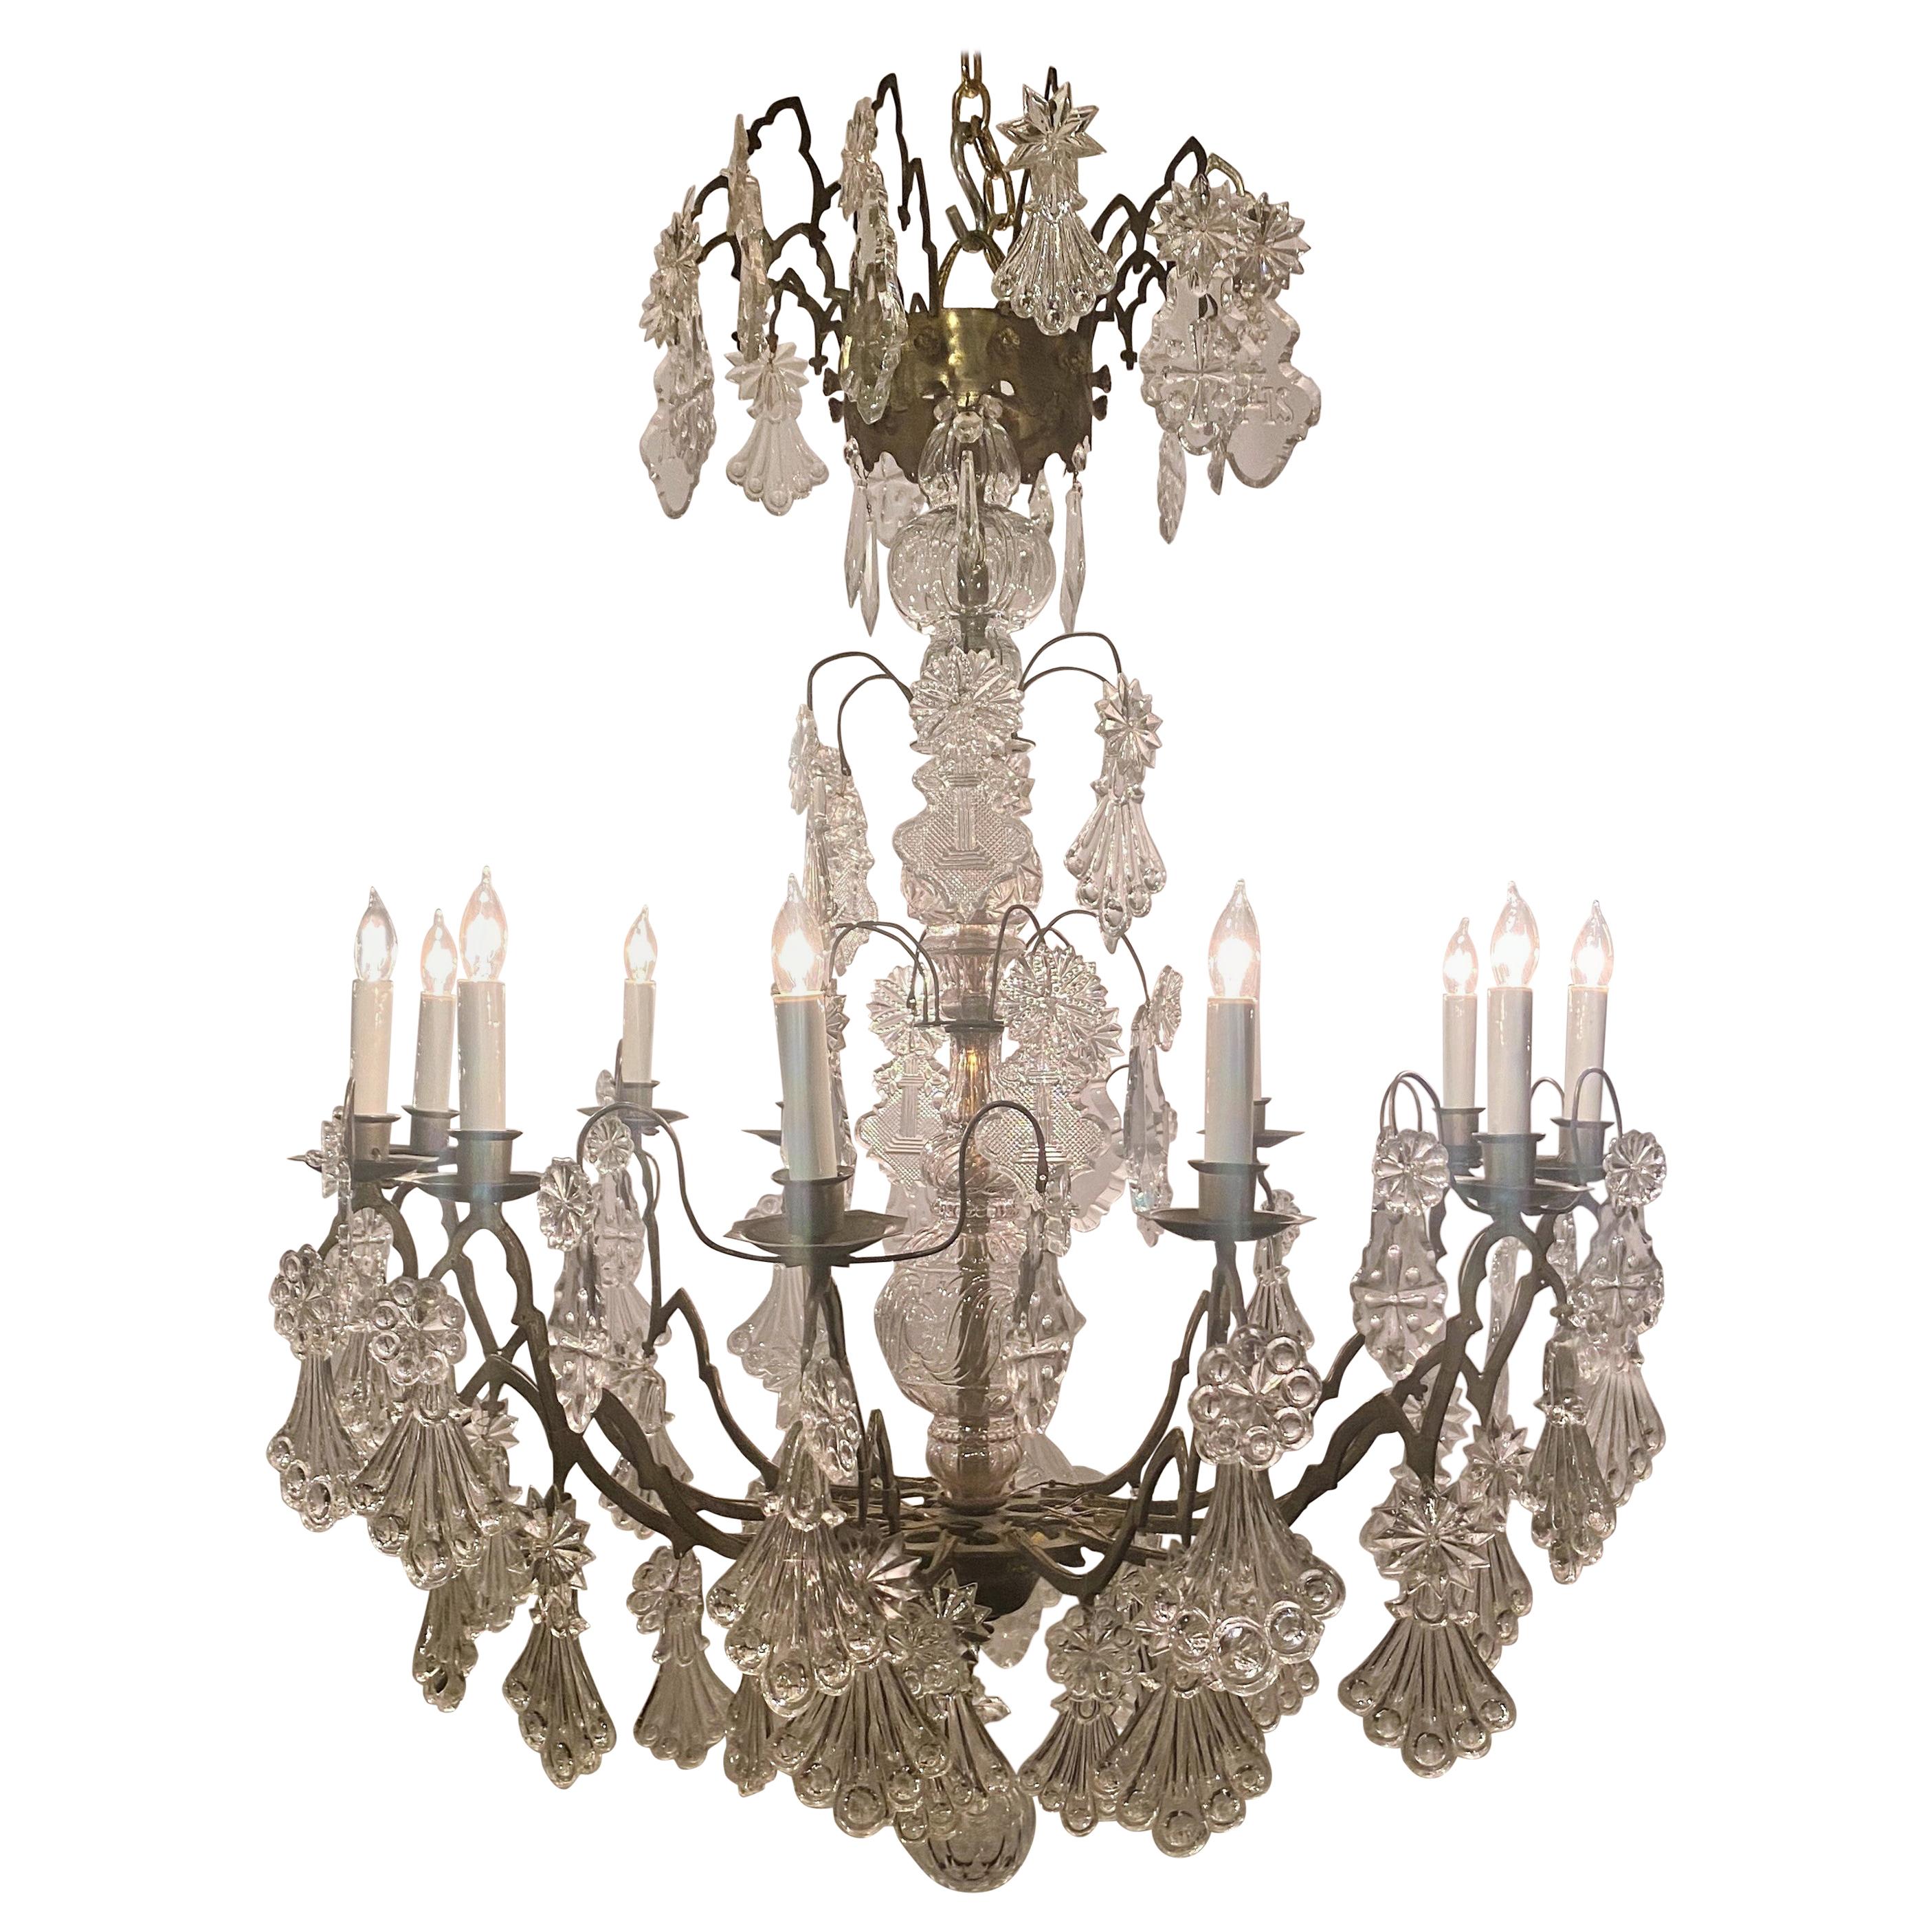 Antique French Crystal and Bronze Chandelier, circa 1880